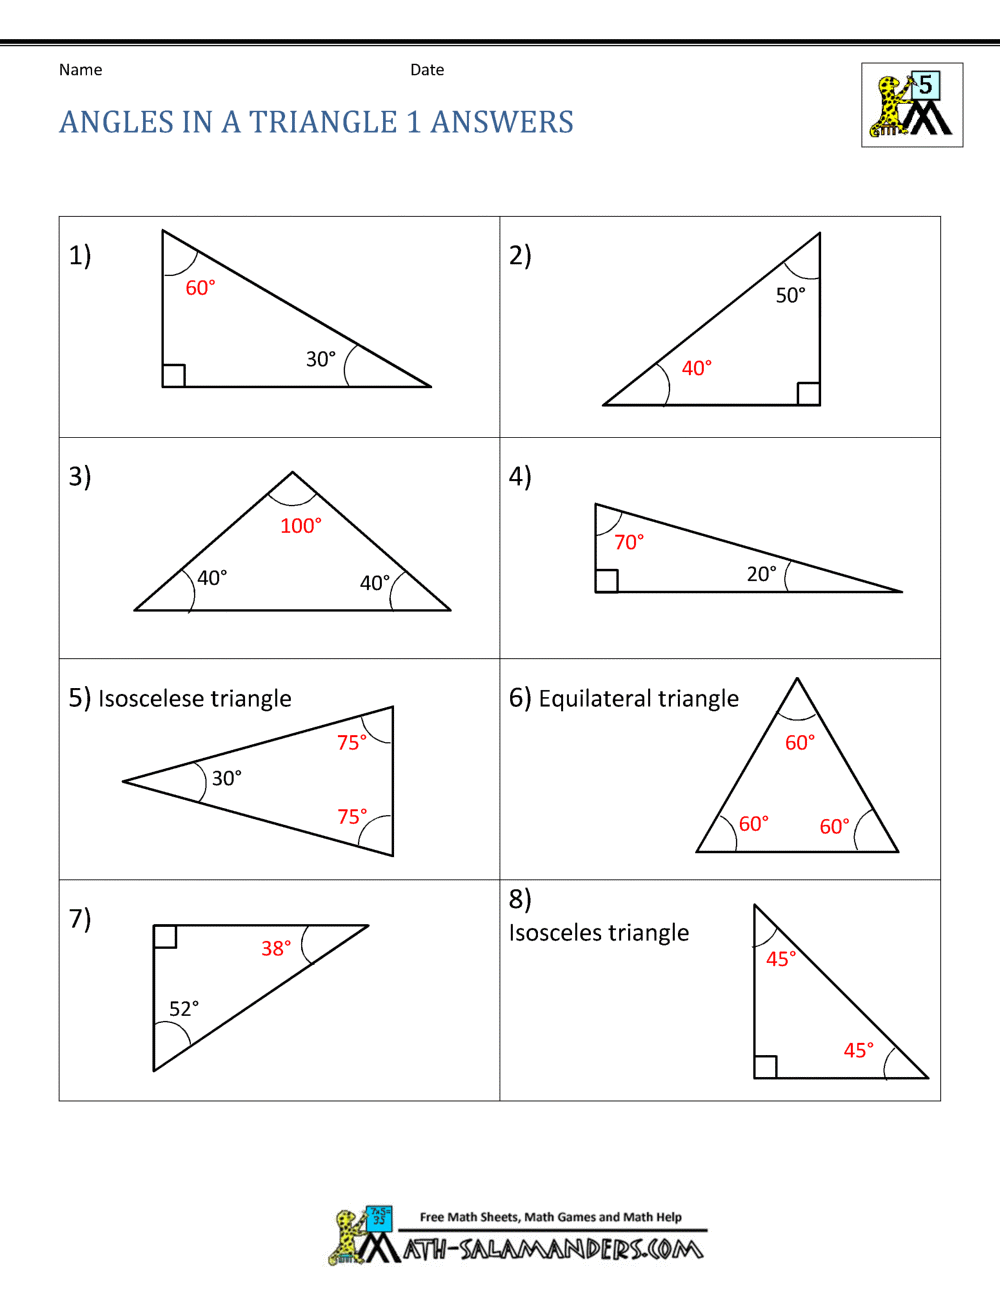 11th Grade Geometry For Triangle Angle Sum Worksheet Answers